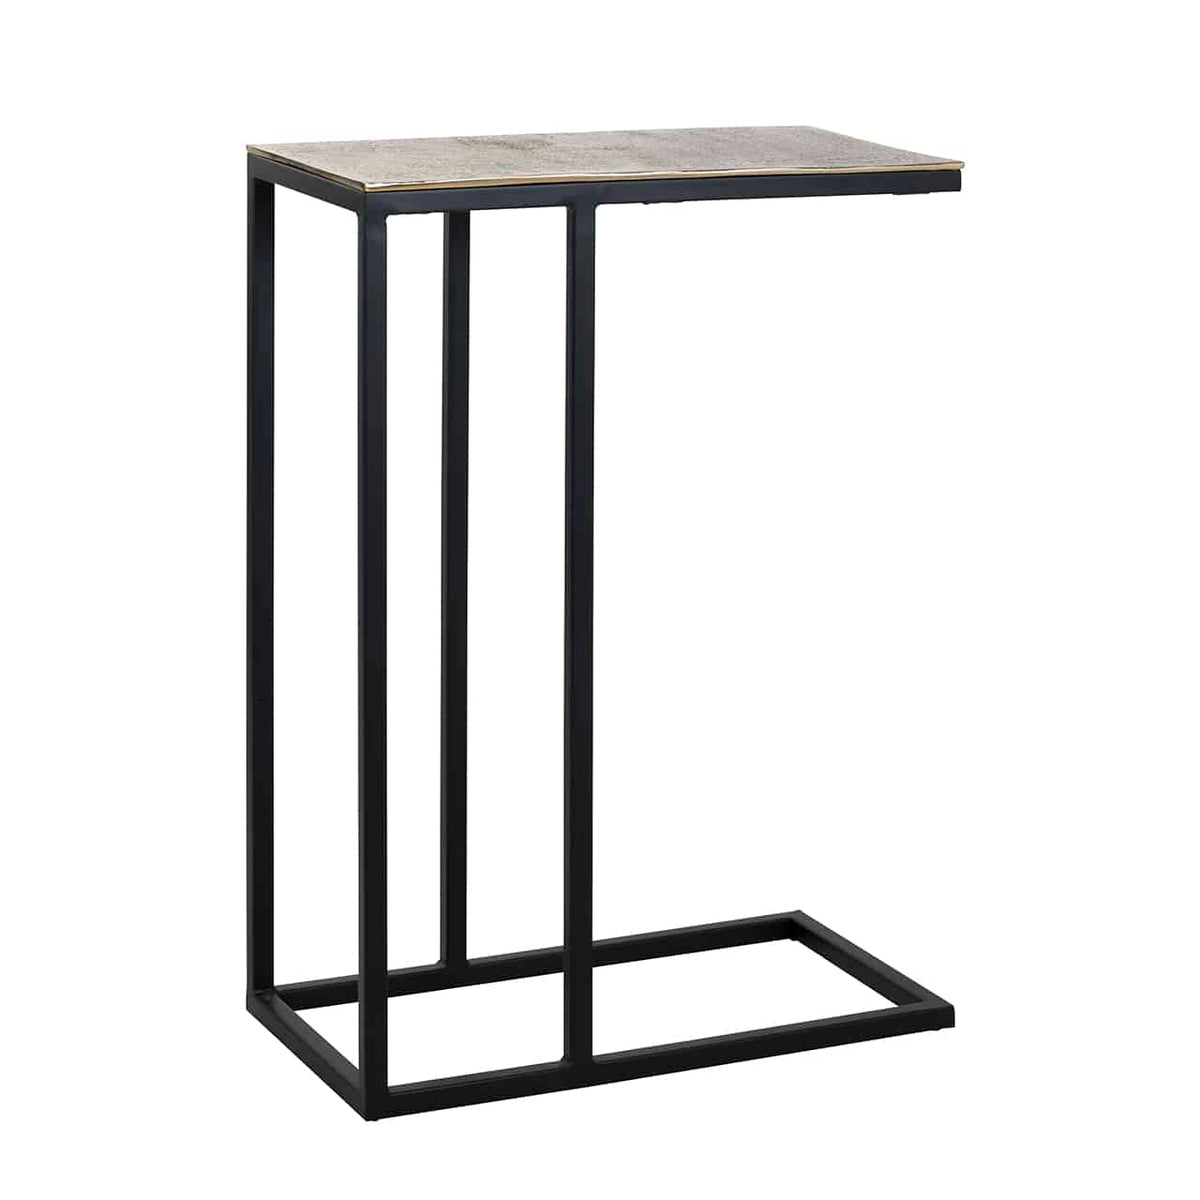 Richmond Interiors side table Calloway champagne gold corner table